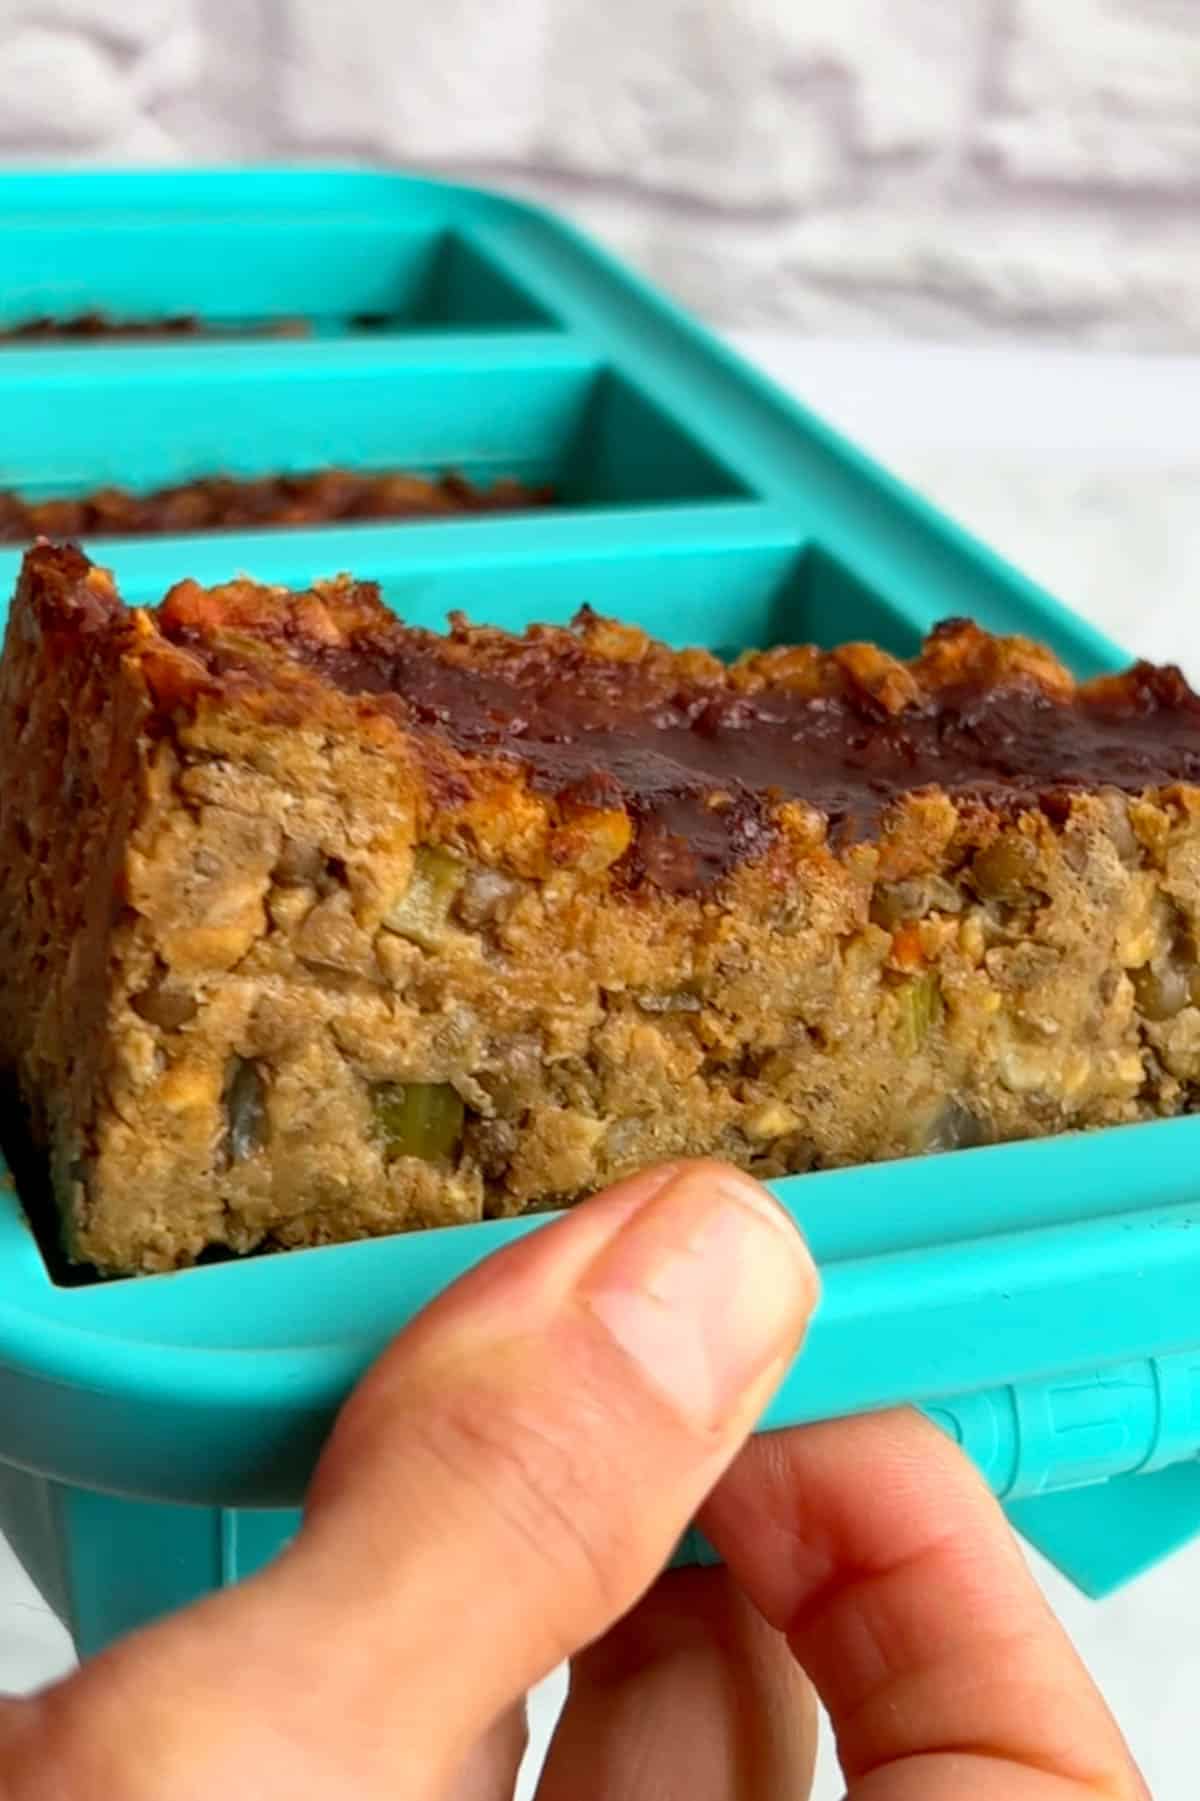 Vegan meatloaf popping out from a one cup sized turquoise soupercube freezer tray.